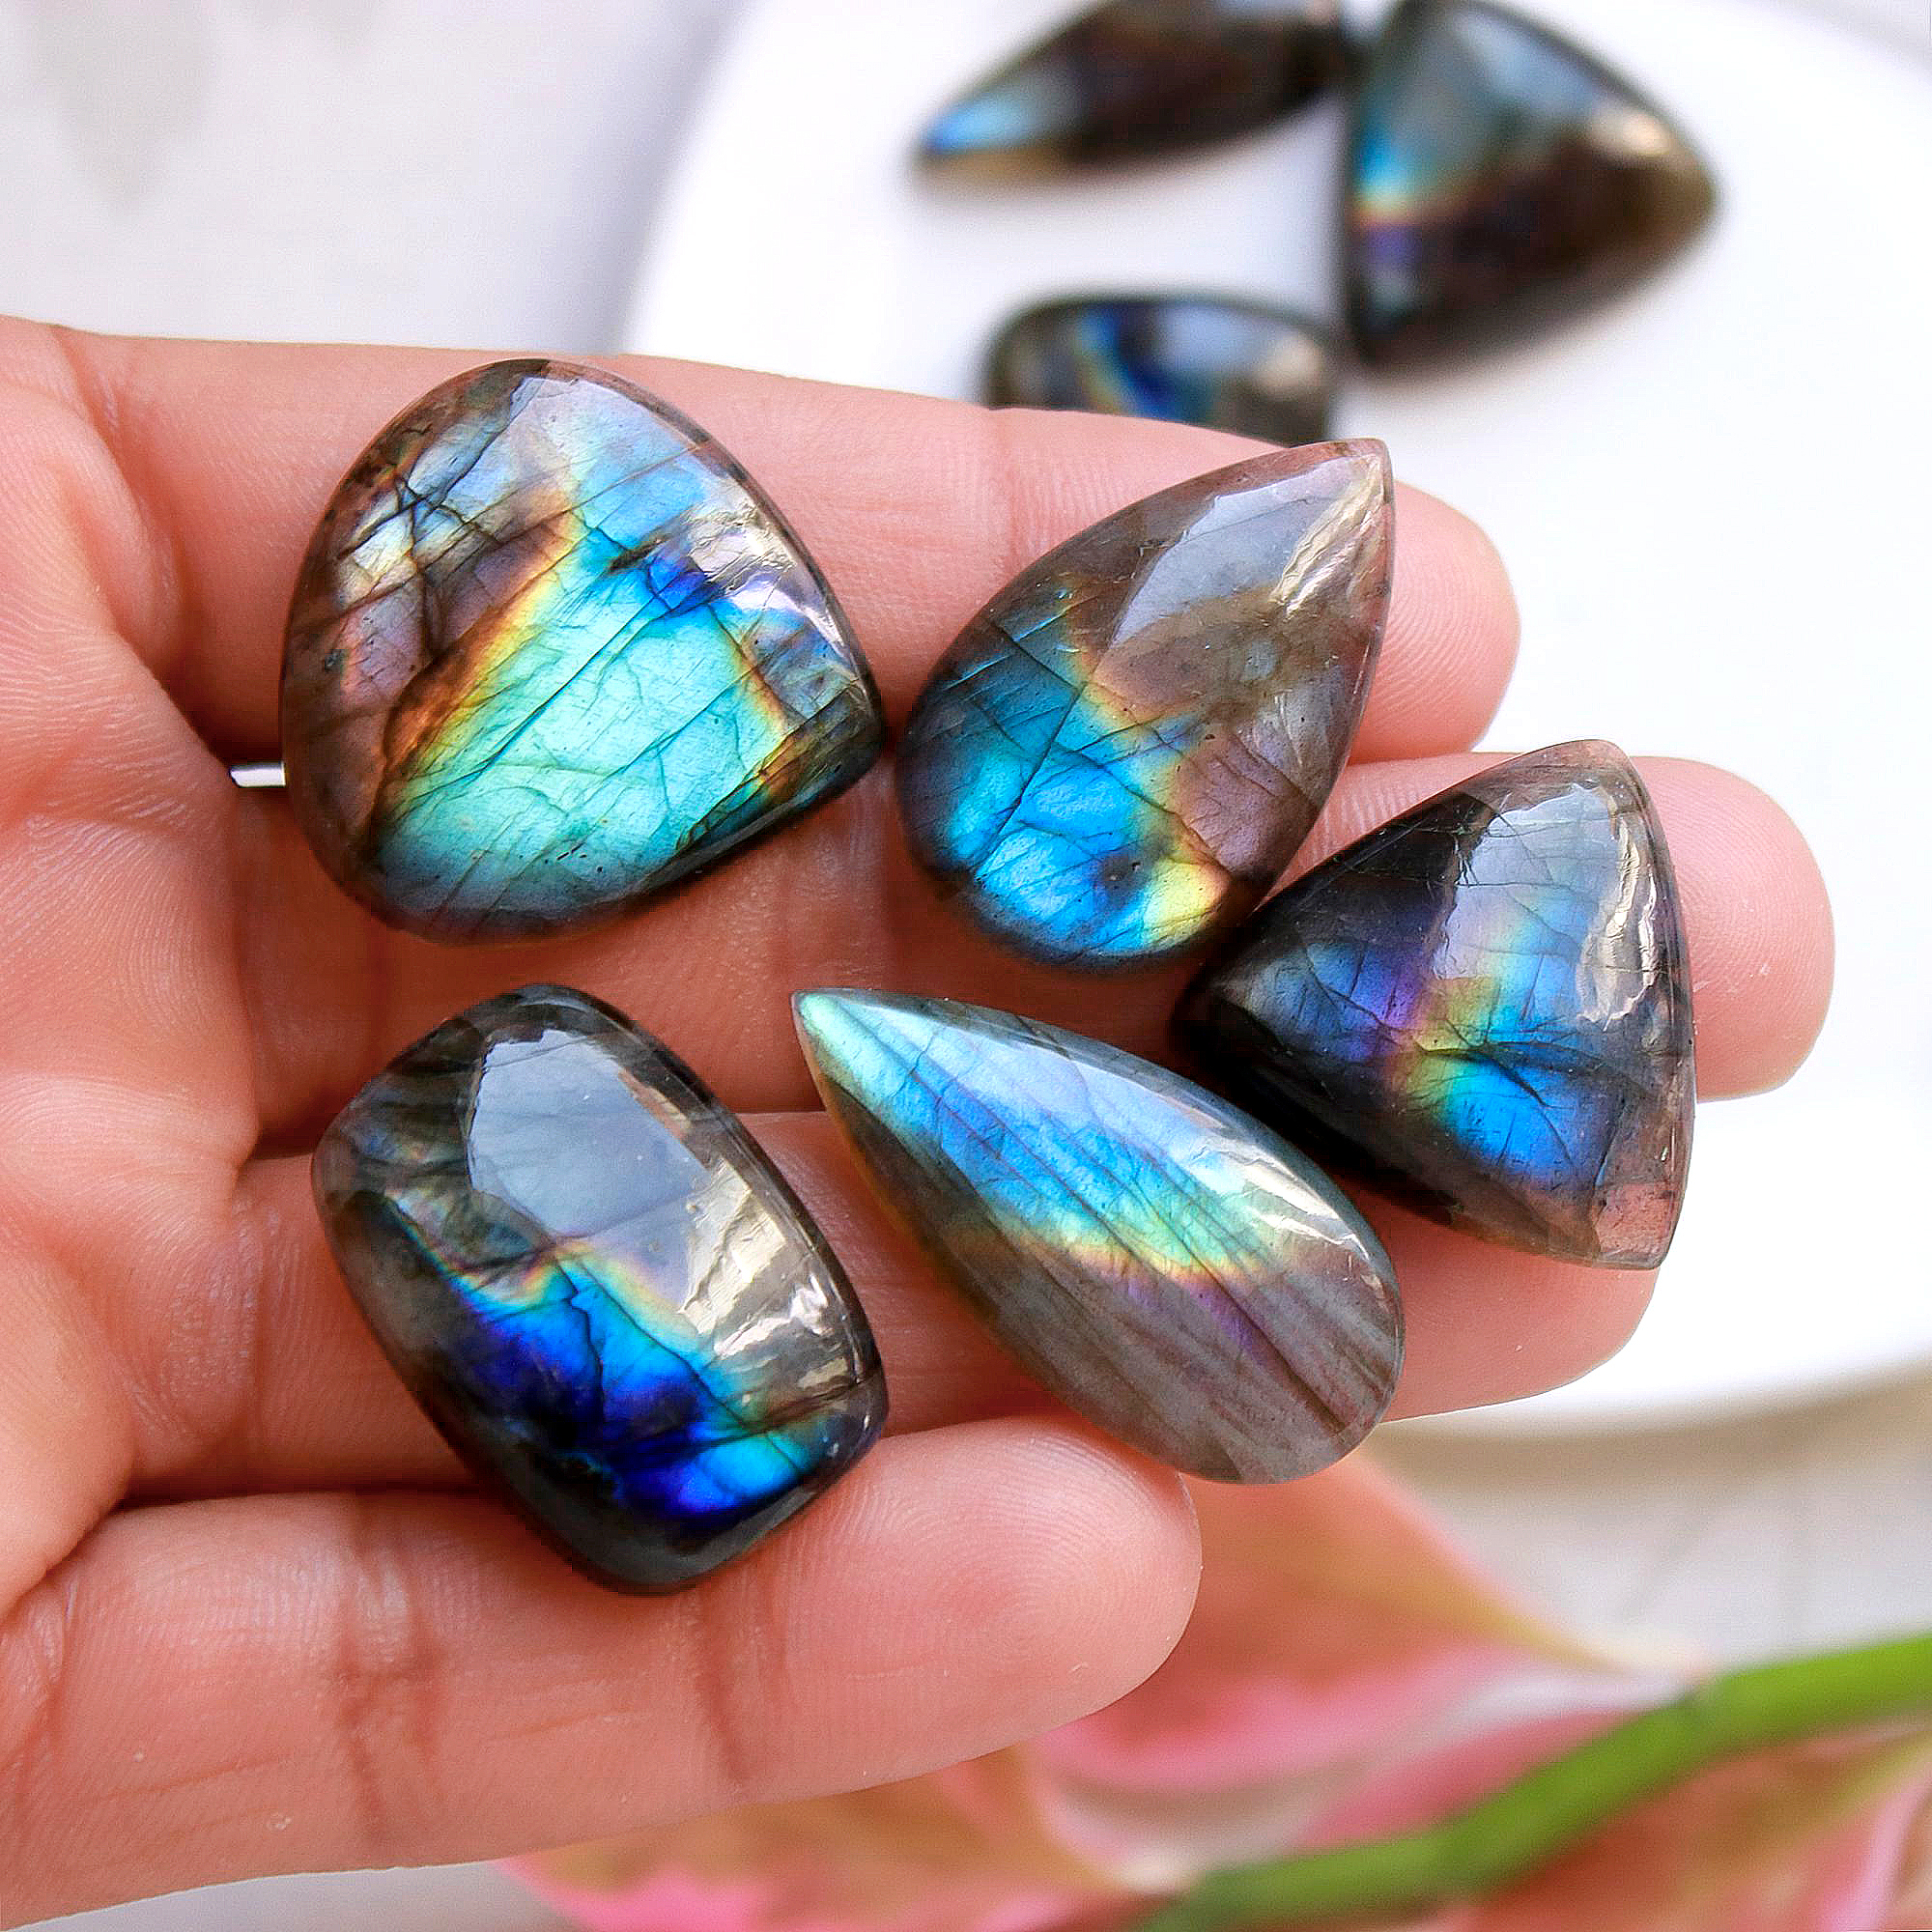 9 Pcs.213 Cts Natural labradorite Cabochon Loose Gemstone For Jewelry Wholesale Lot Size 31x15 20x14mm